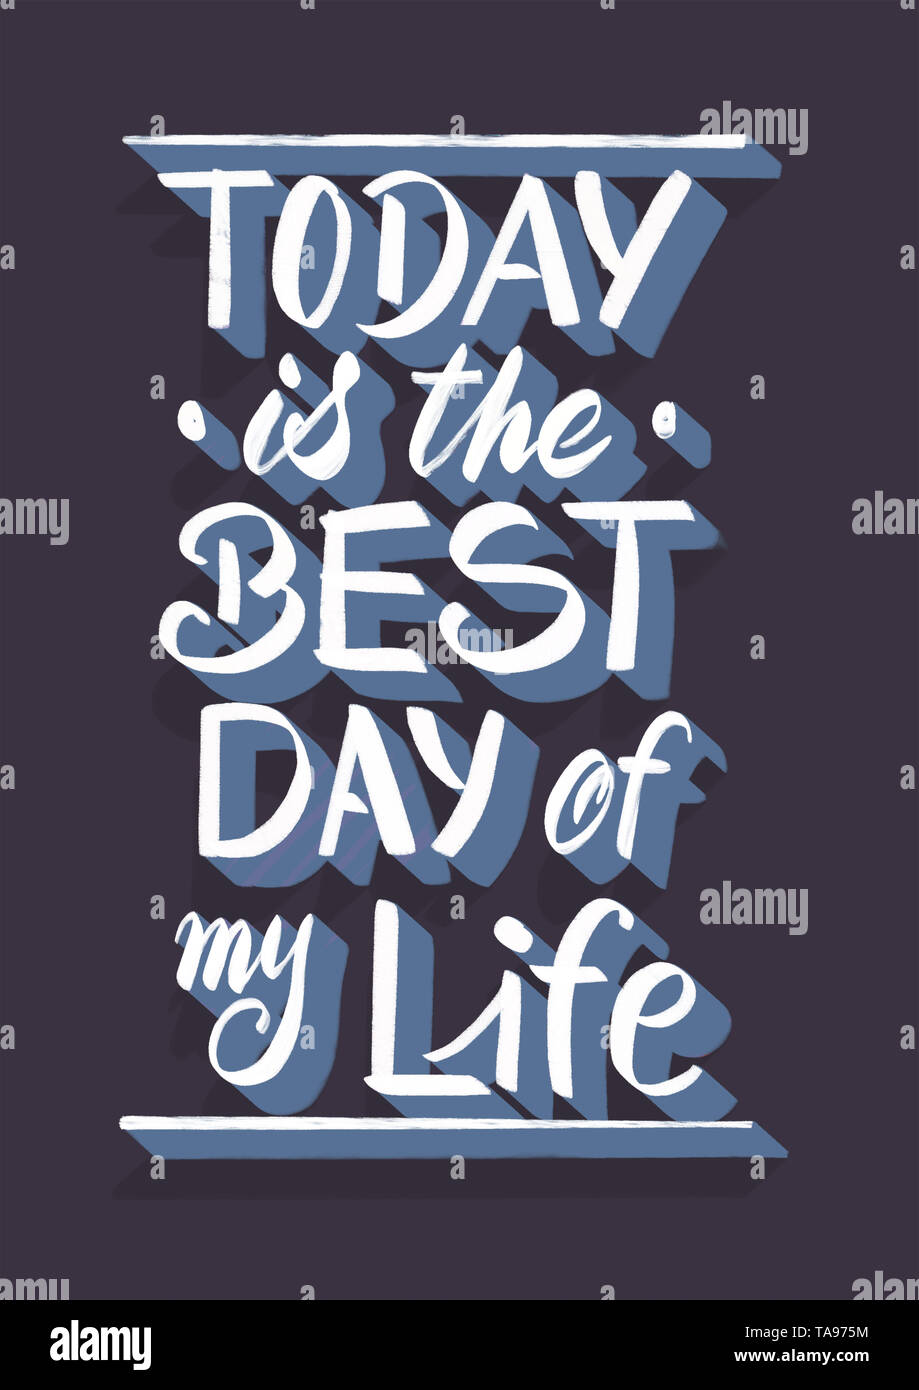 Today is the best day of my life - hand lettering composition Stock Photo